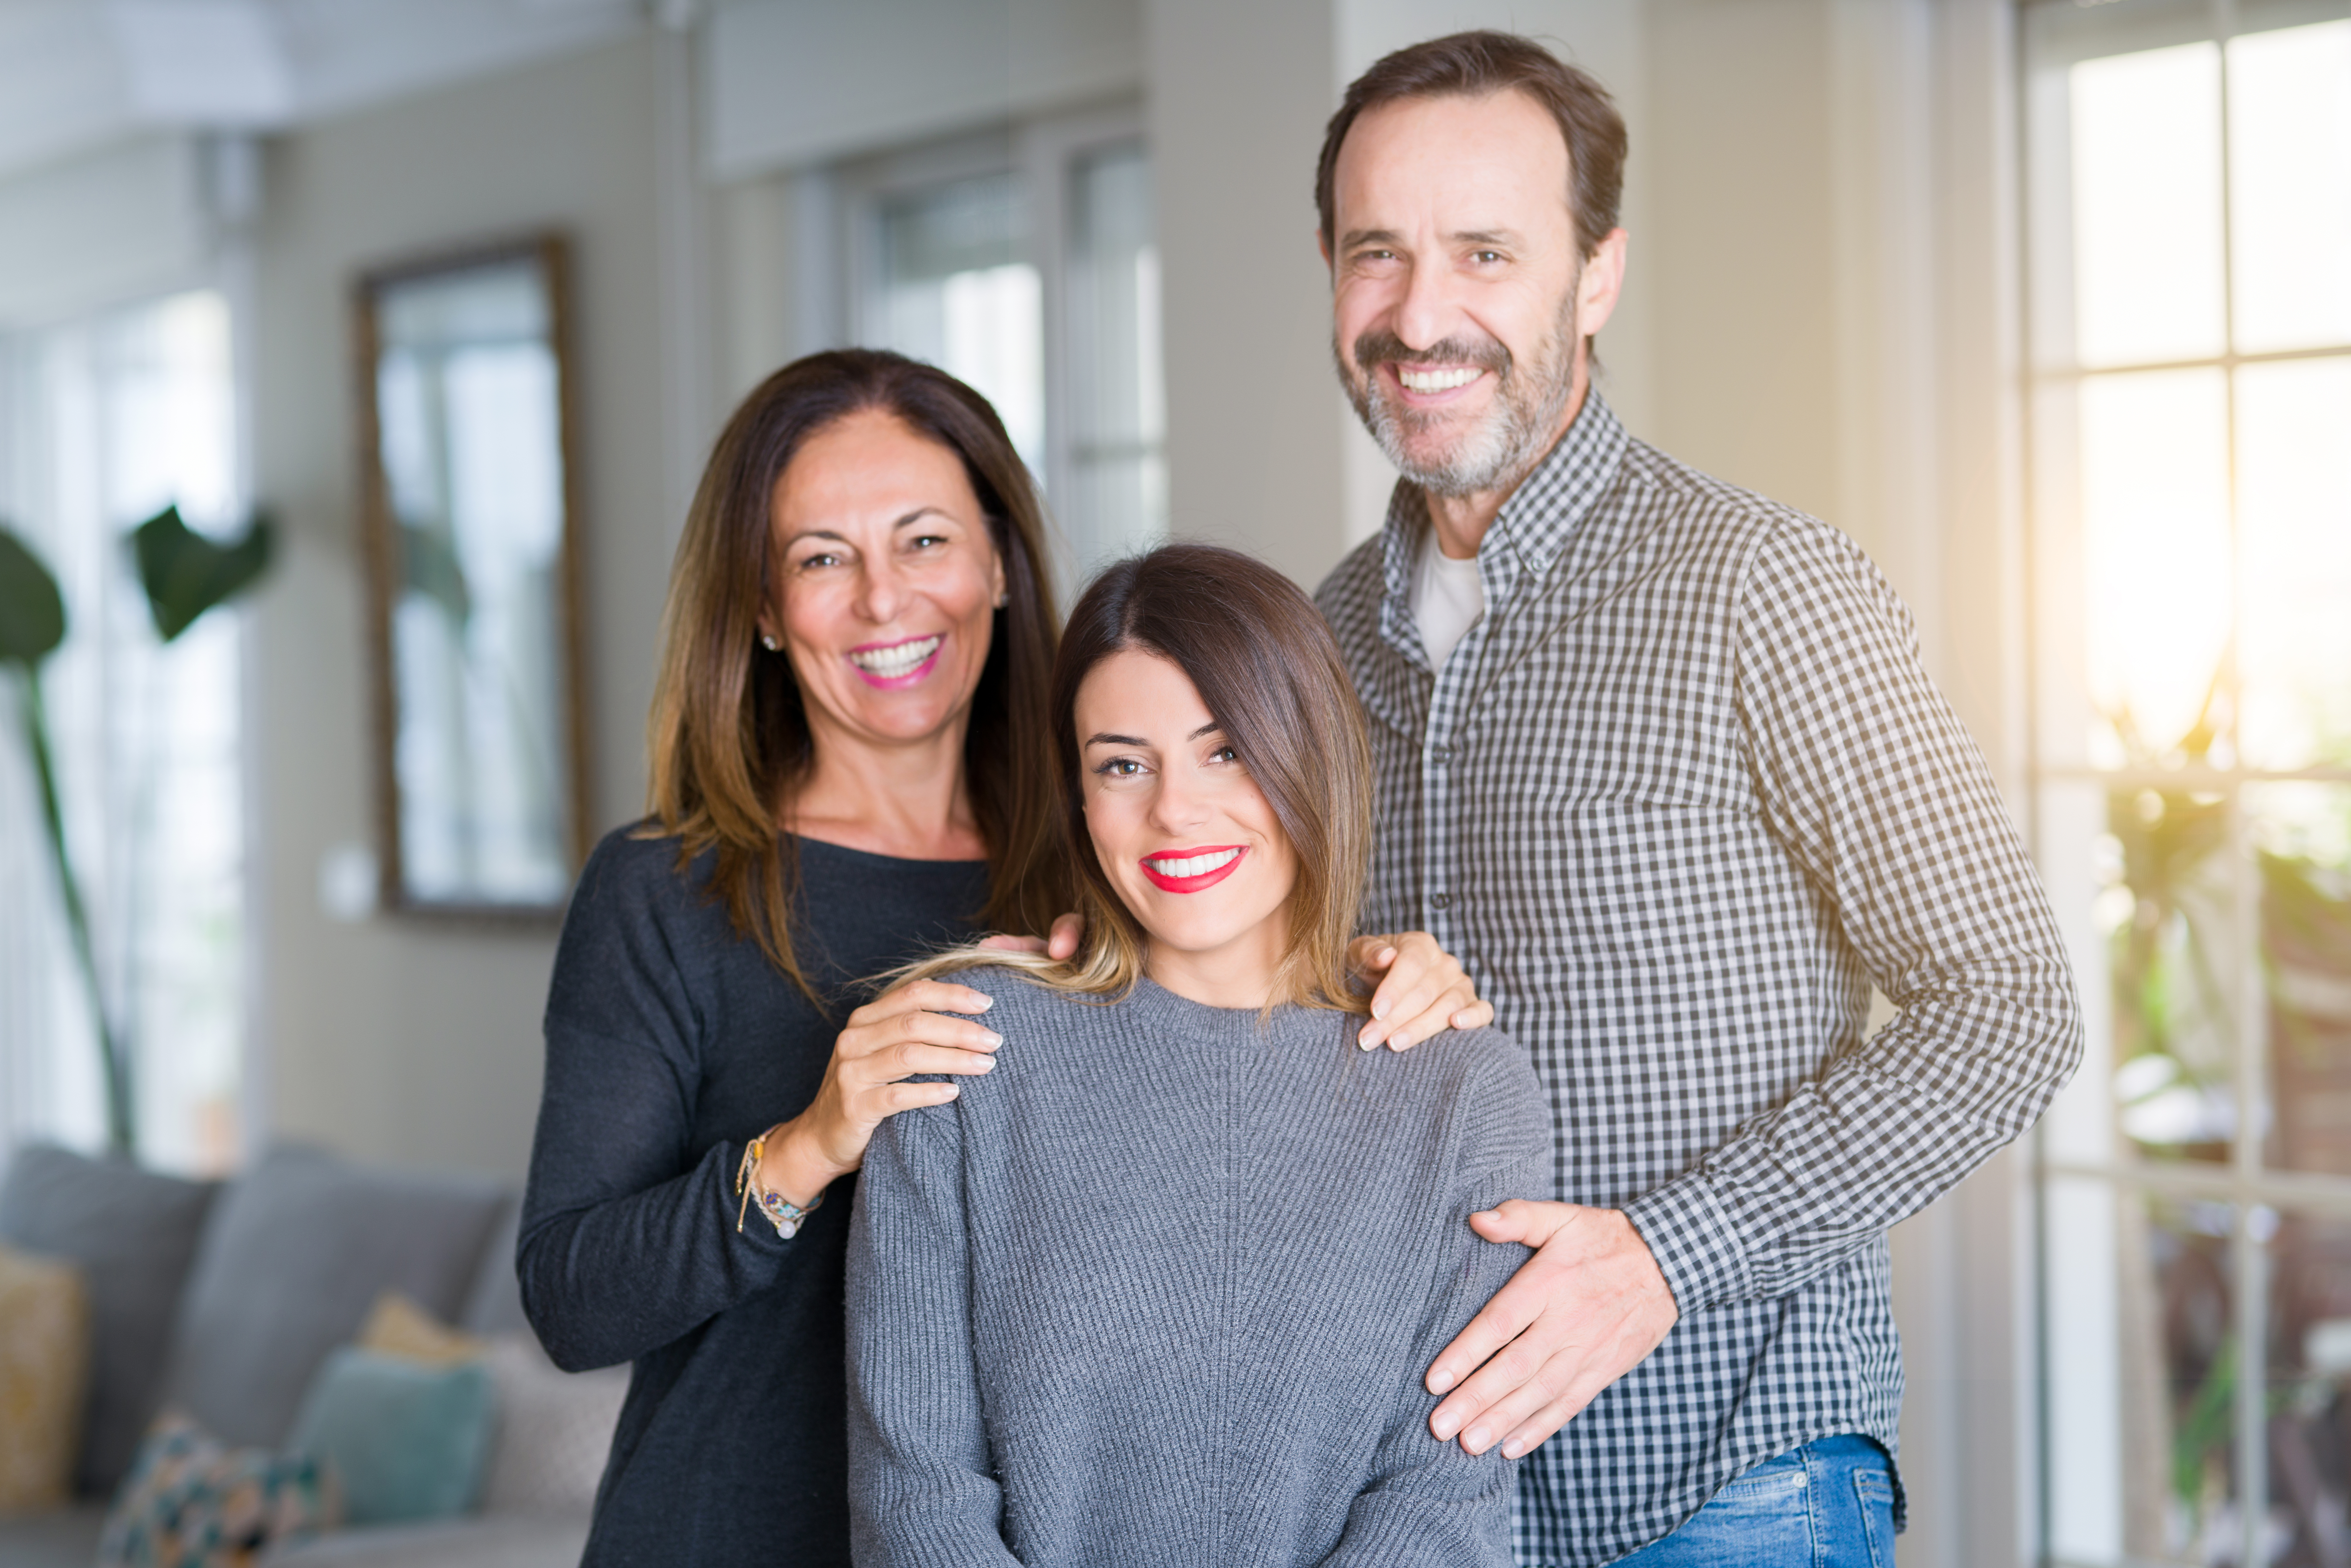 A girl standing with her parents | Source: Shutterstock